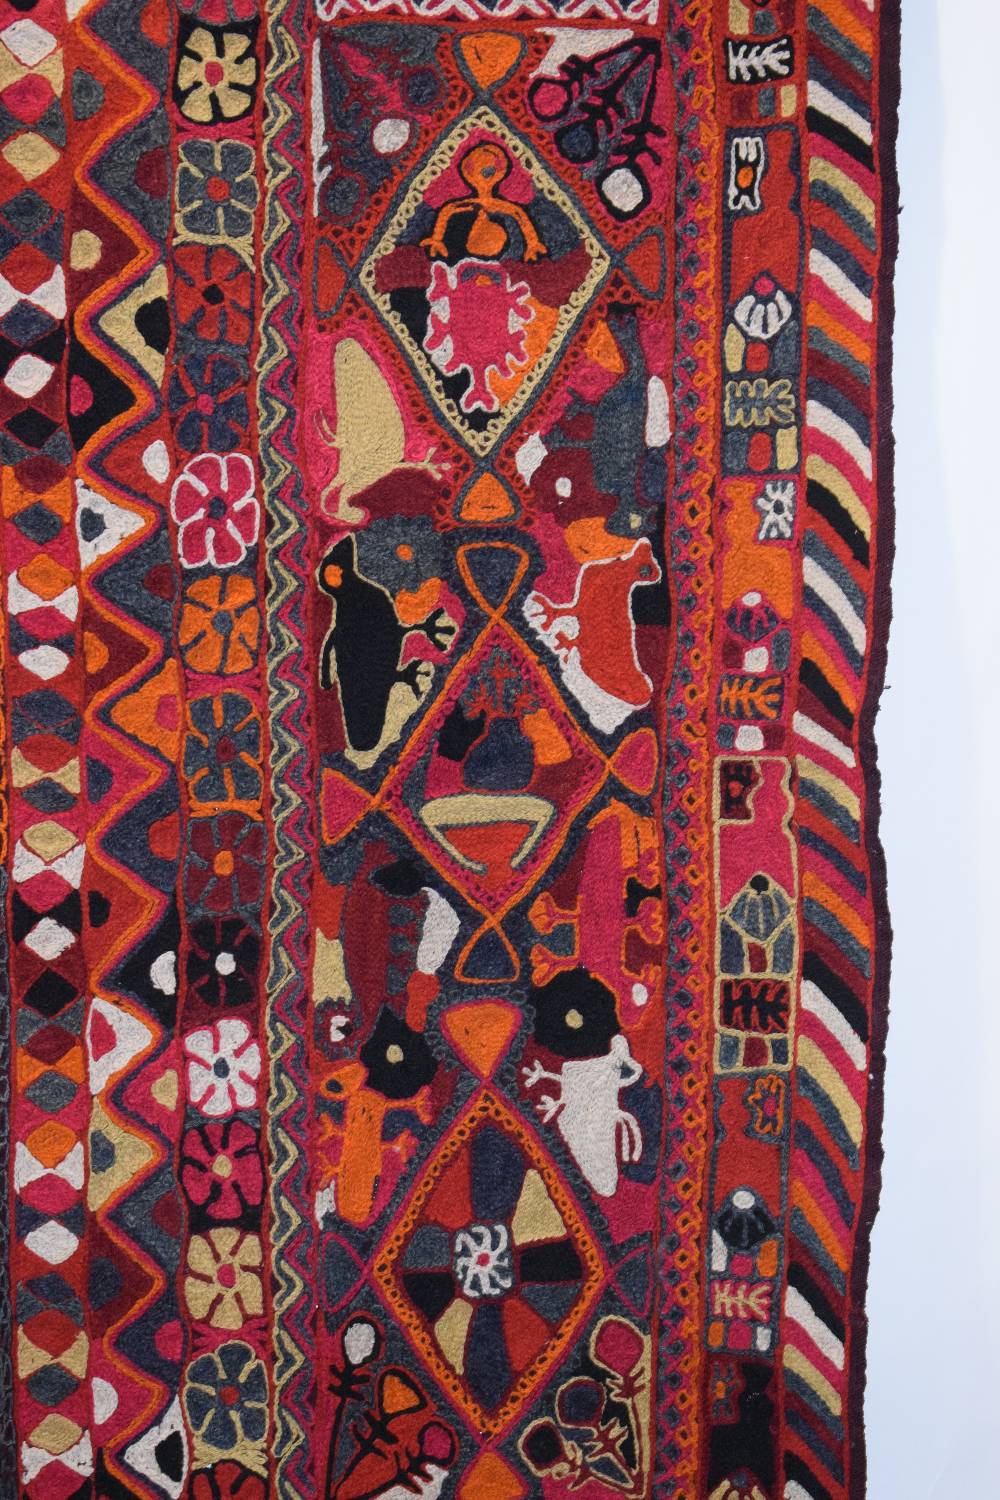 Iraqi embroidered wedding blanket, Samawa, Marshlands of southern Iraq, 20th century, 8ft. 7in. X - Image 3 of 10